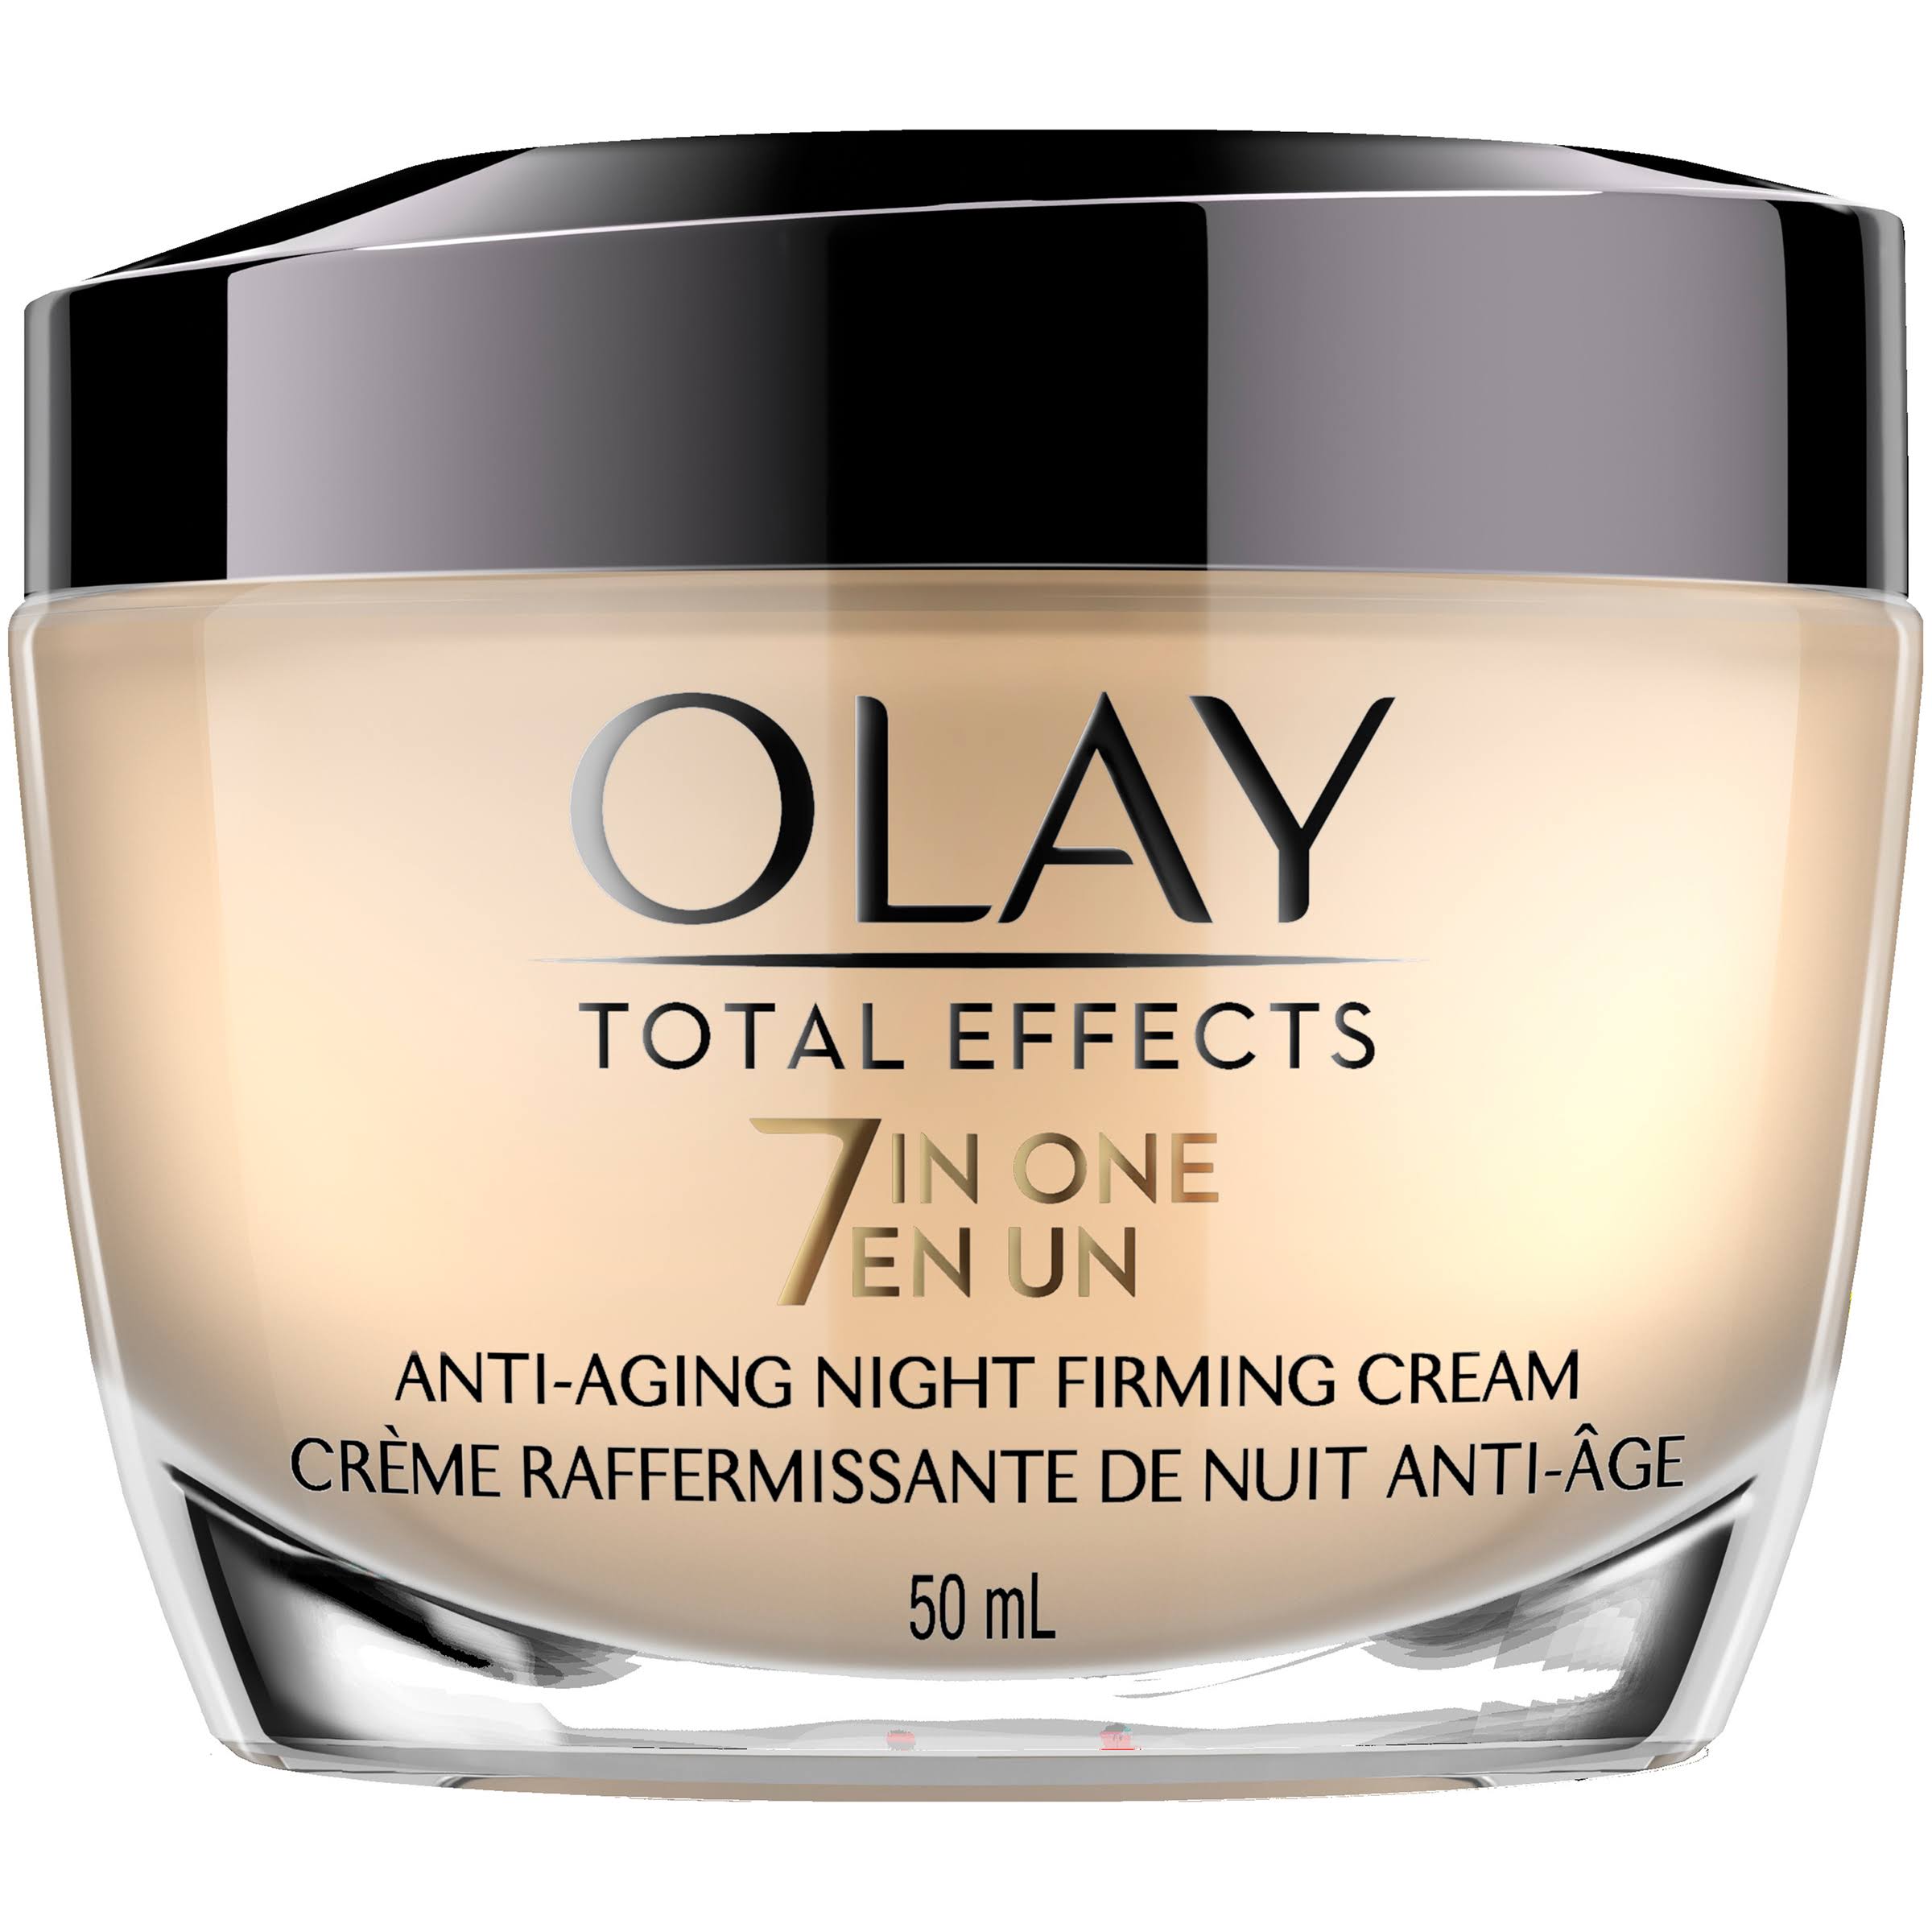 Olay Total Effects Anti Aging Night Firming Cream - 1.7oz